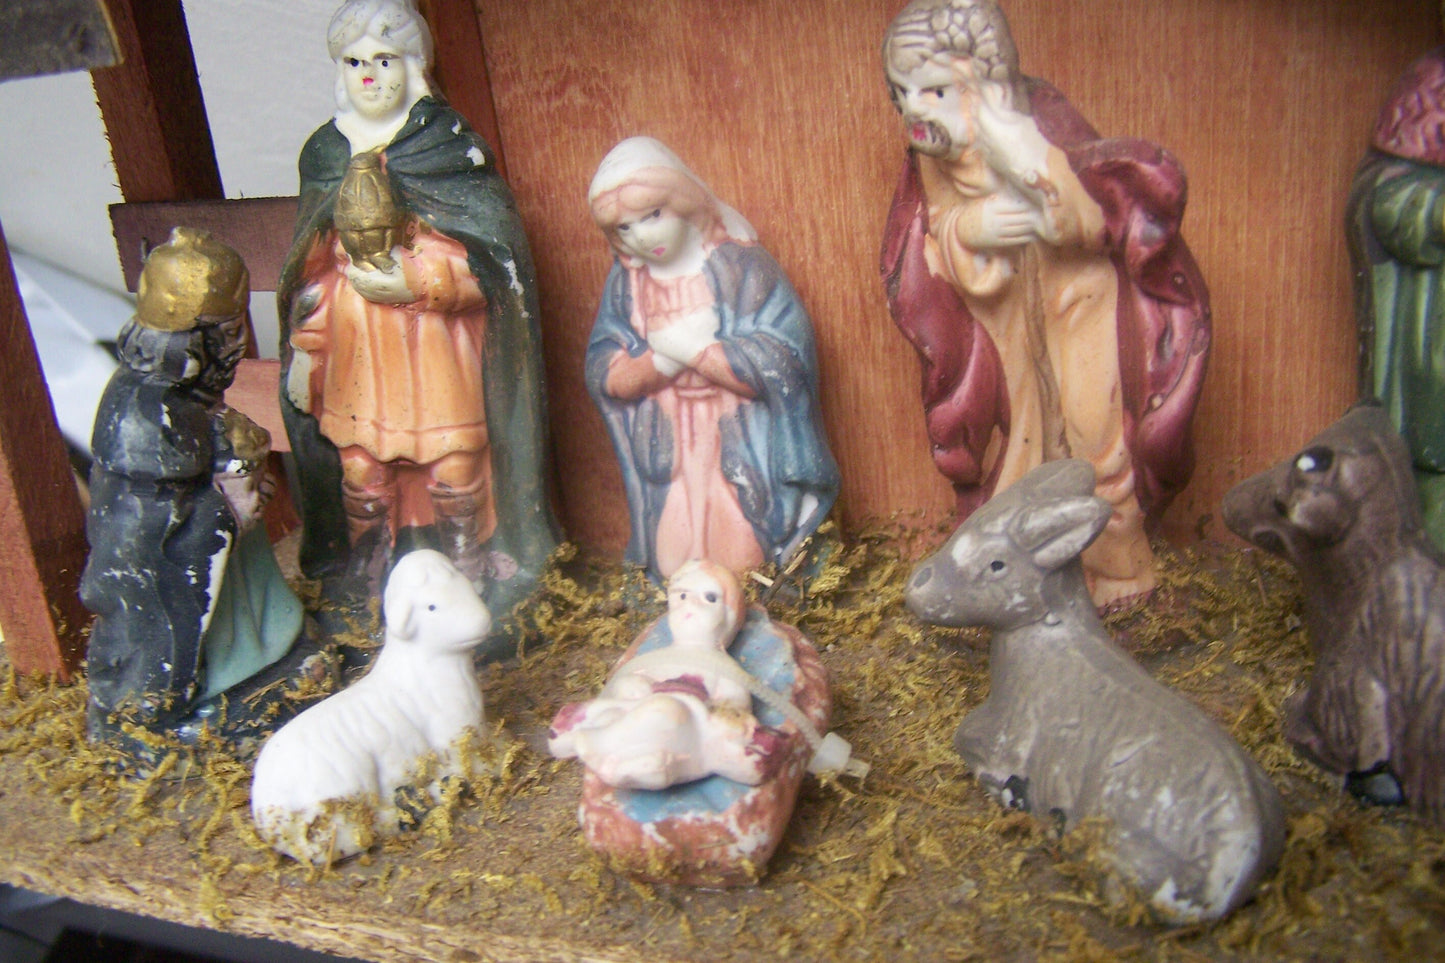 1980s Larger Tabletop Basic Wooden Nativity Set, Resin Figurines  #1 - Mexico